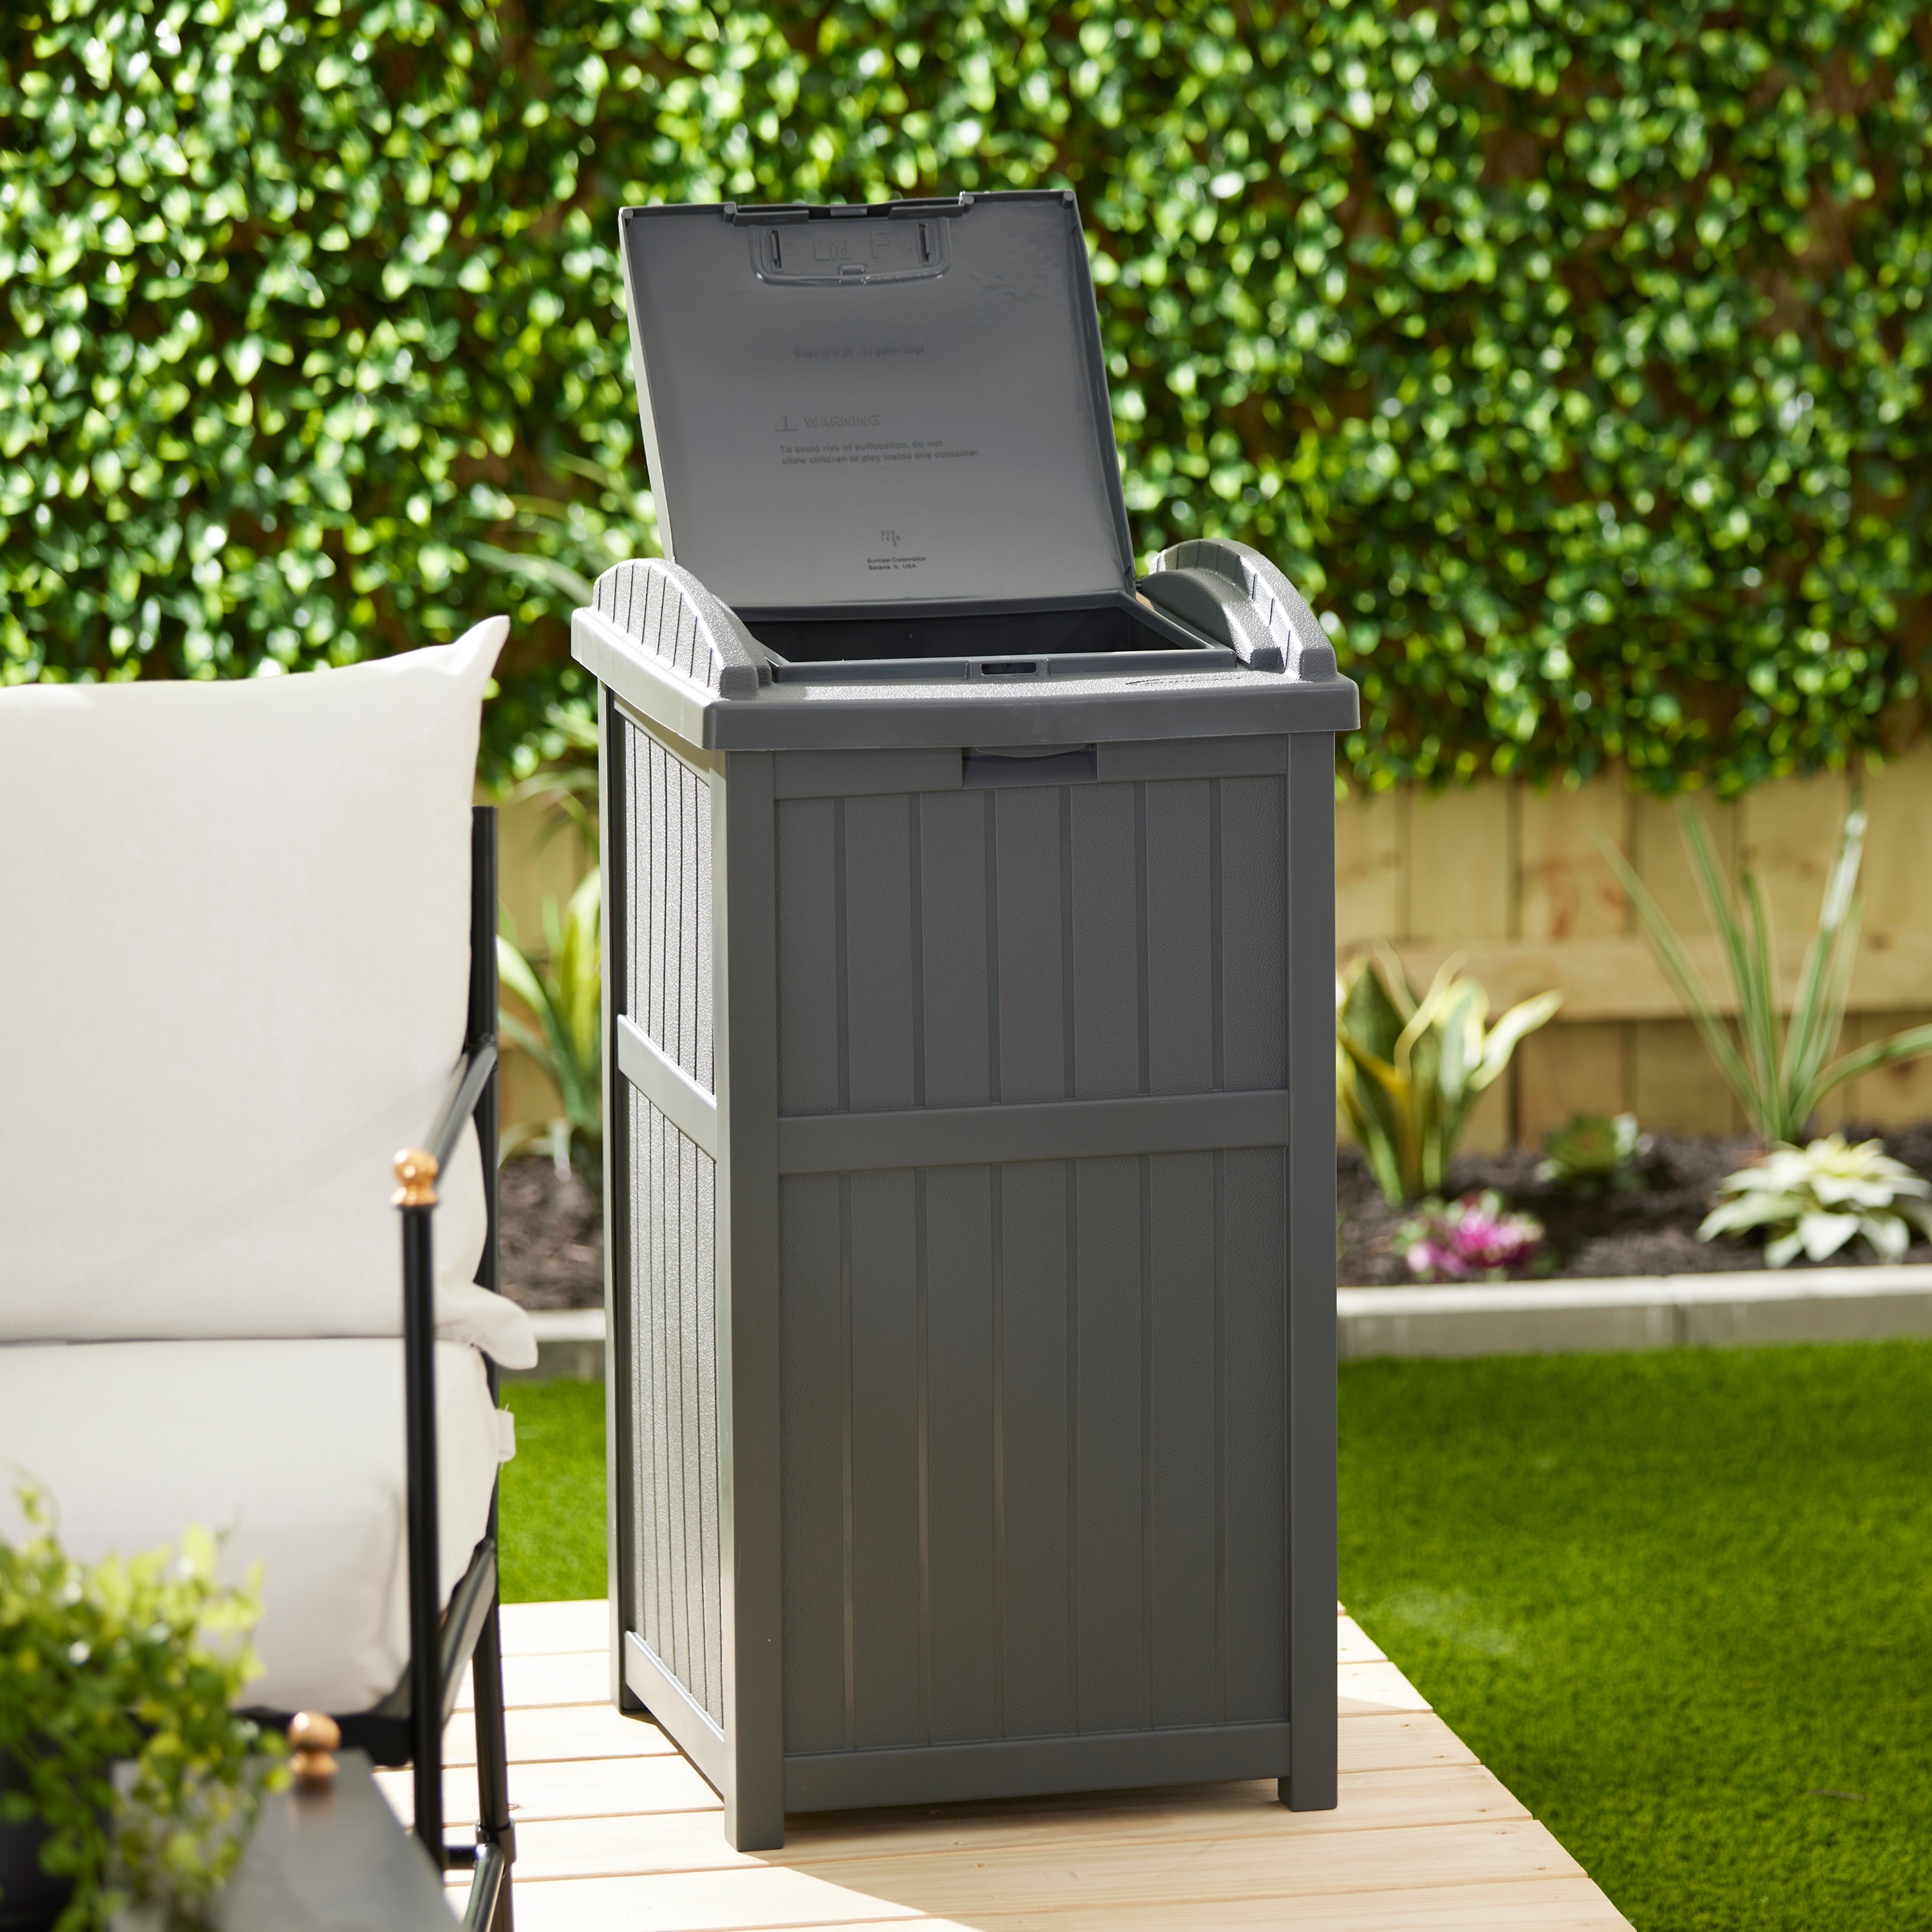 Suncast 33 Gallons Swing Top Trash Can